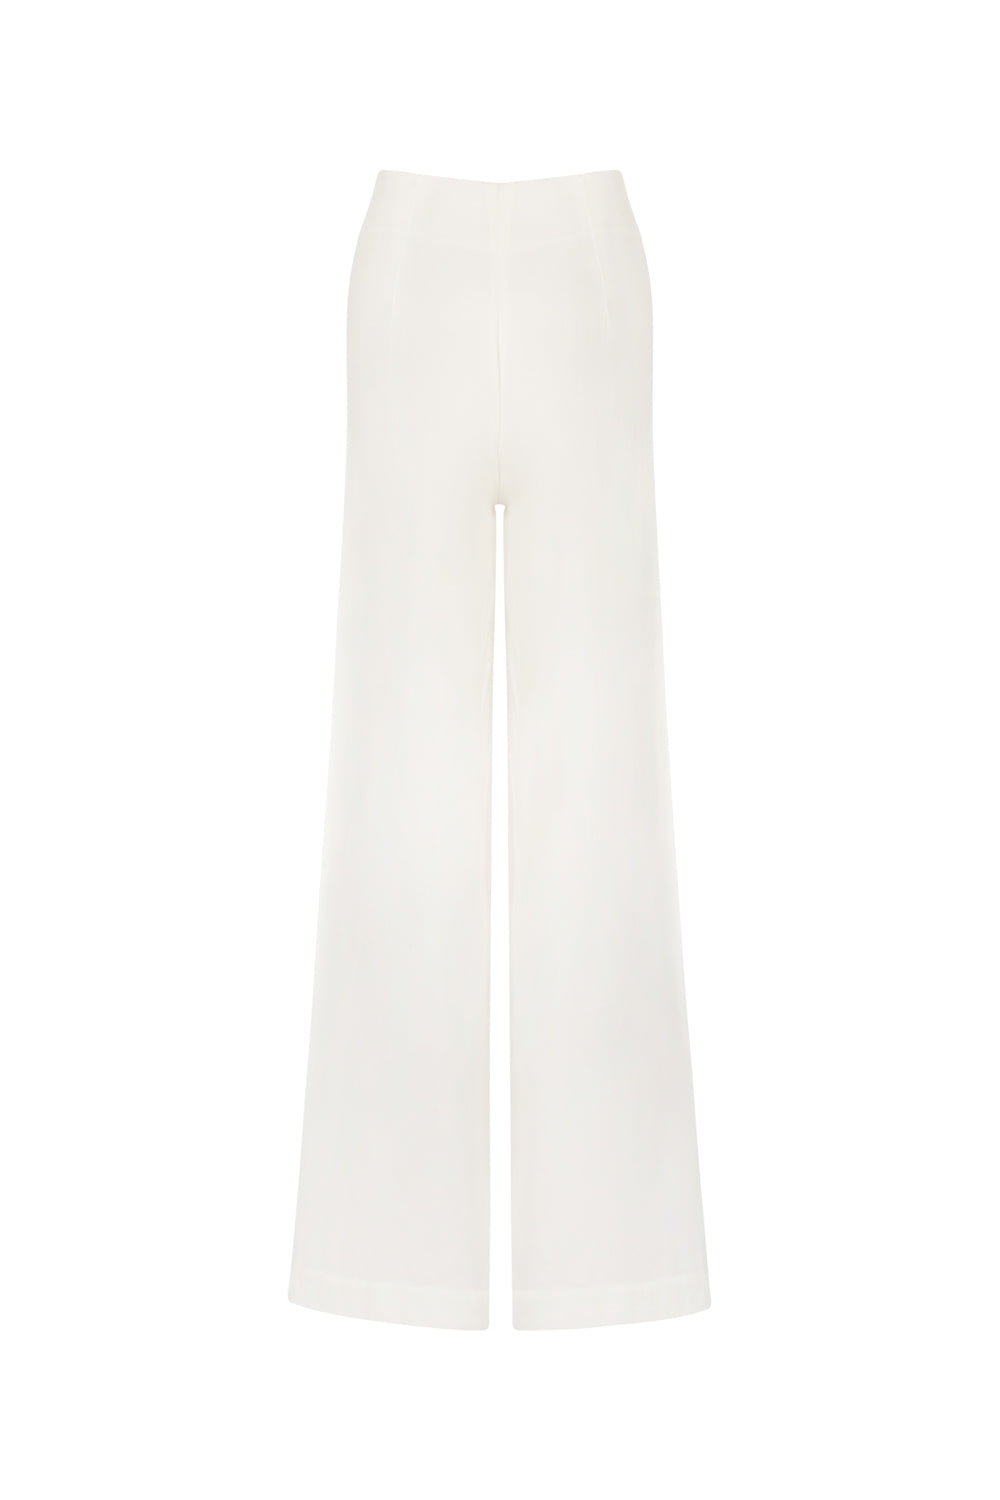 flook the label xola pants champagne white eco woven product image back 